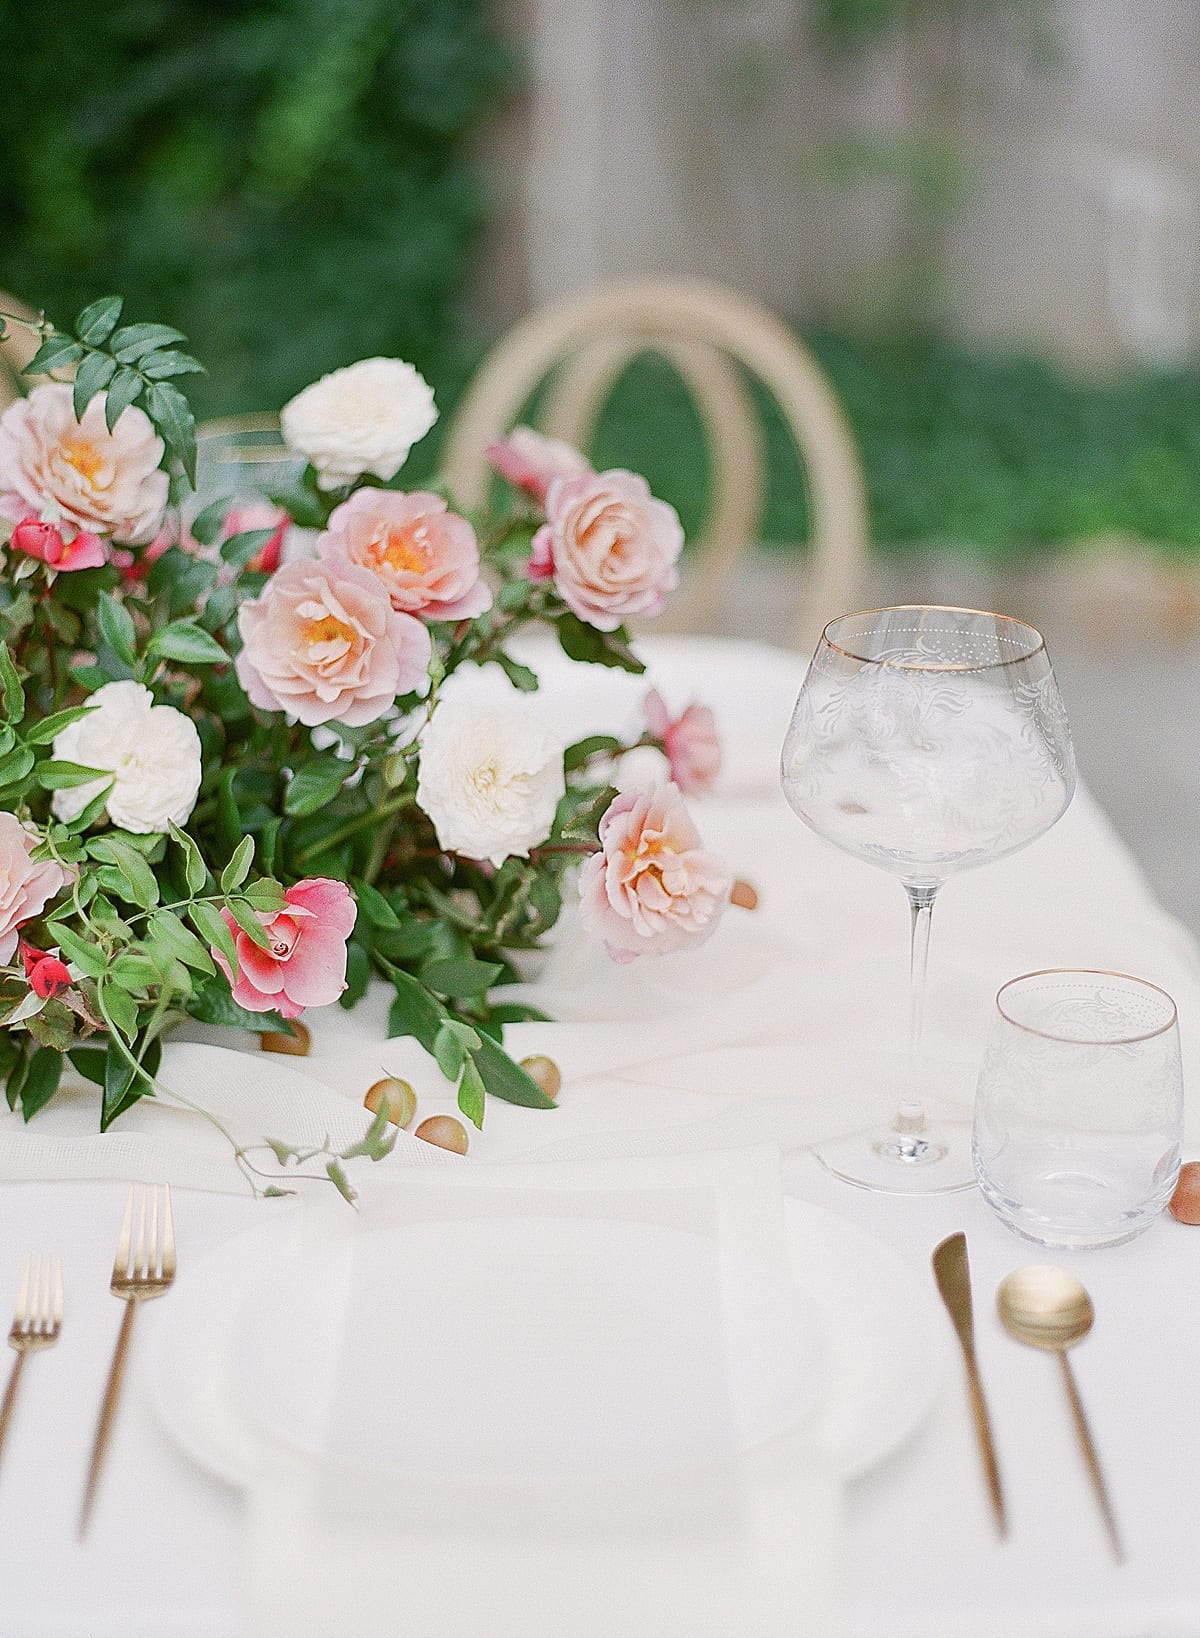 Wedding Reception Table with Rose Centerpiece Photo